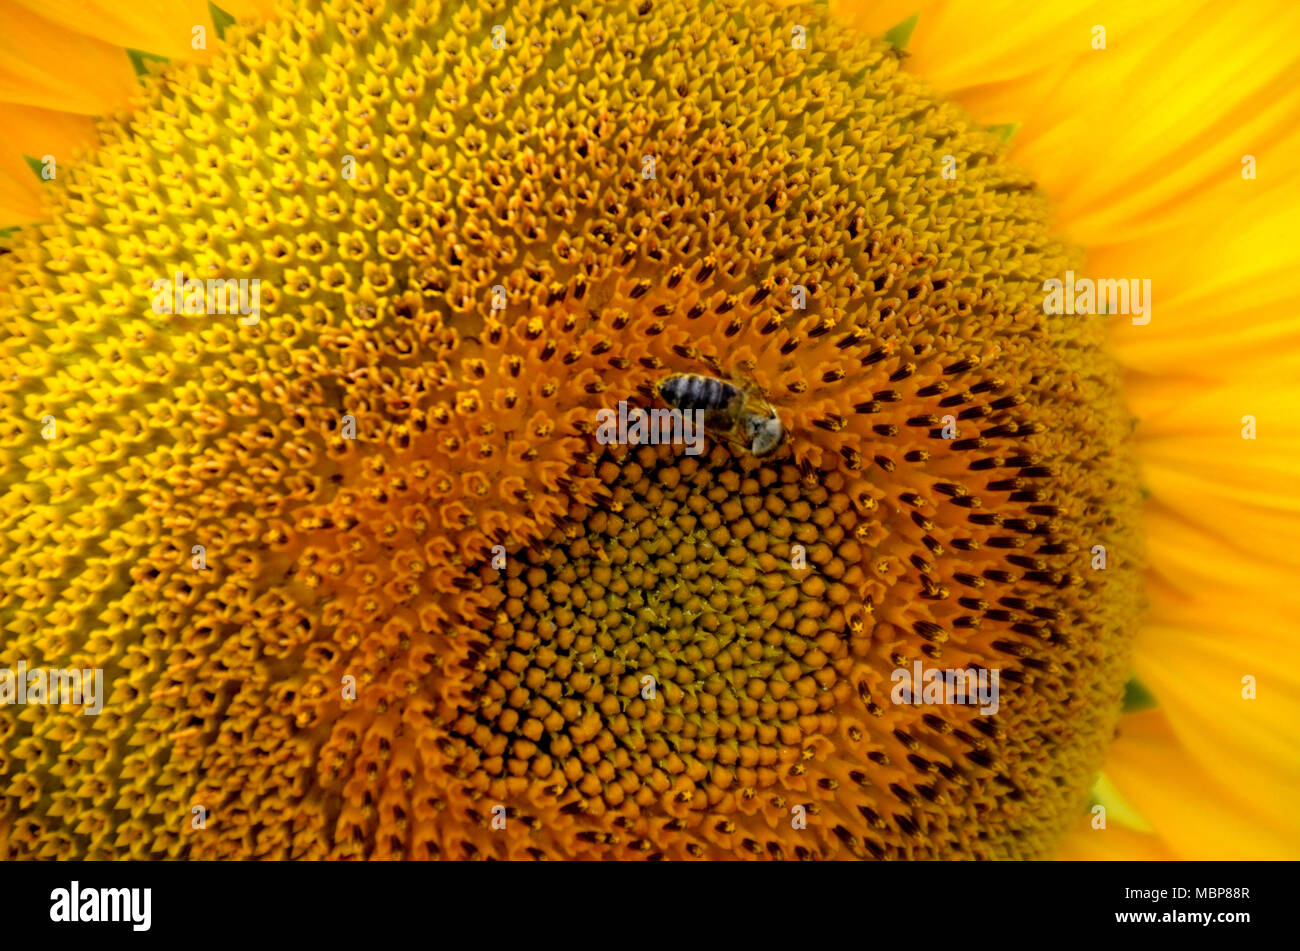 close up of a big yellow sunflower with a bee and petals, can be used as texture or background Stock Photo